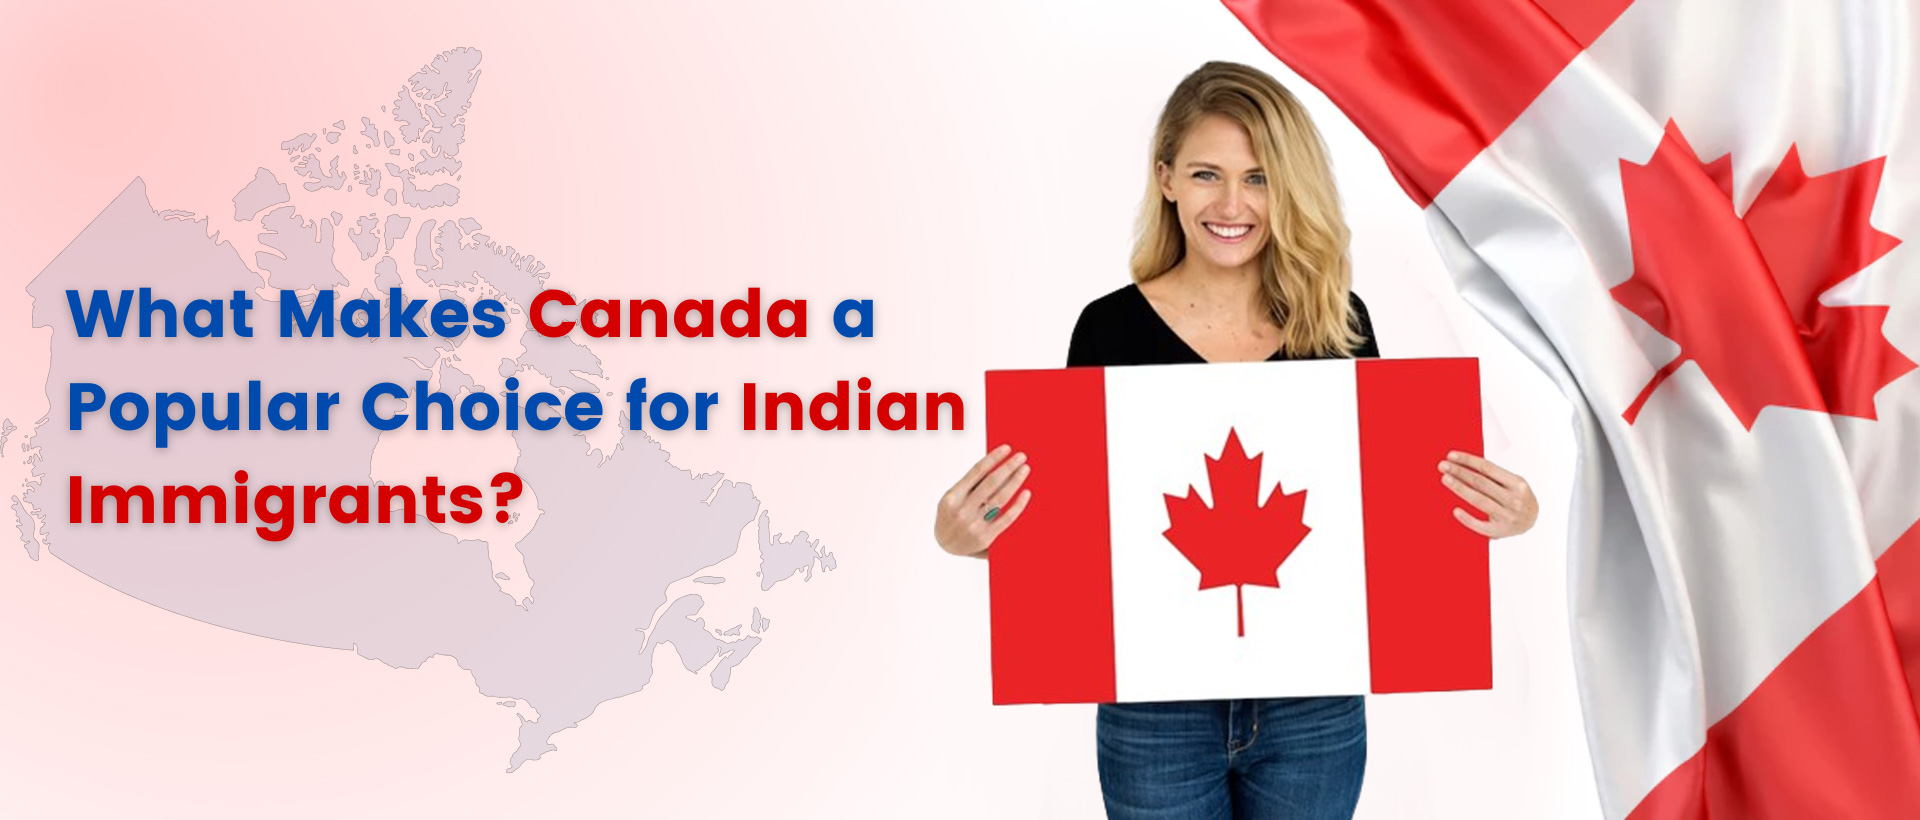 What Makes Canada a Popular Choice for Indian Immigrants?